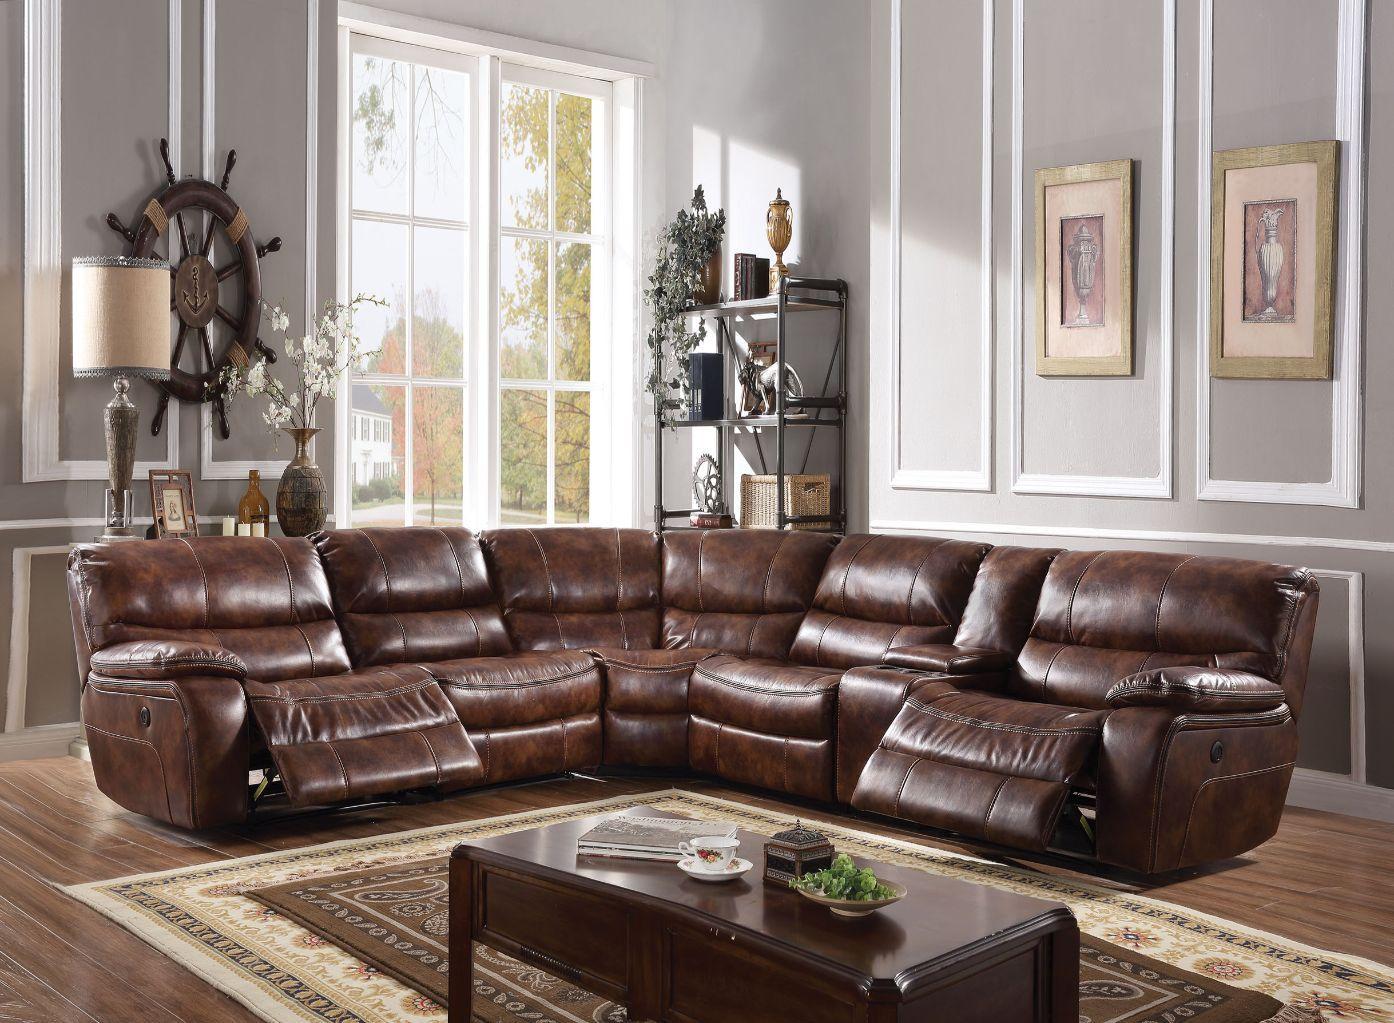 Modern Sectional Recliner Brax Reclining Sectional Sofa 52070-SS 52070-SS in Brown leather gel